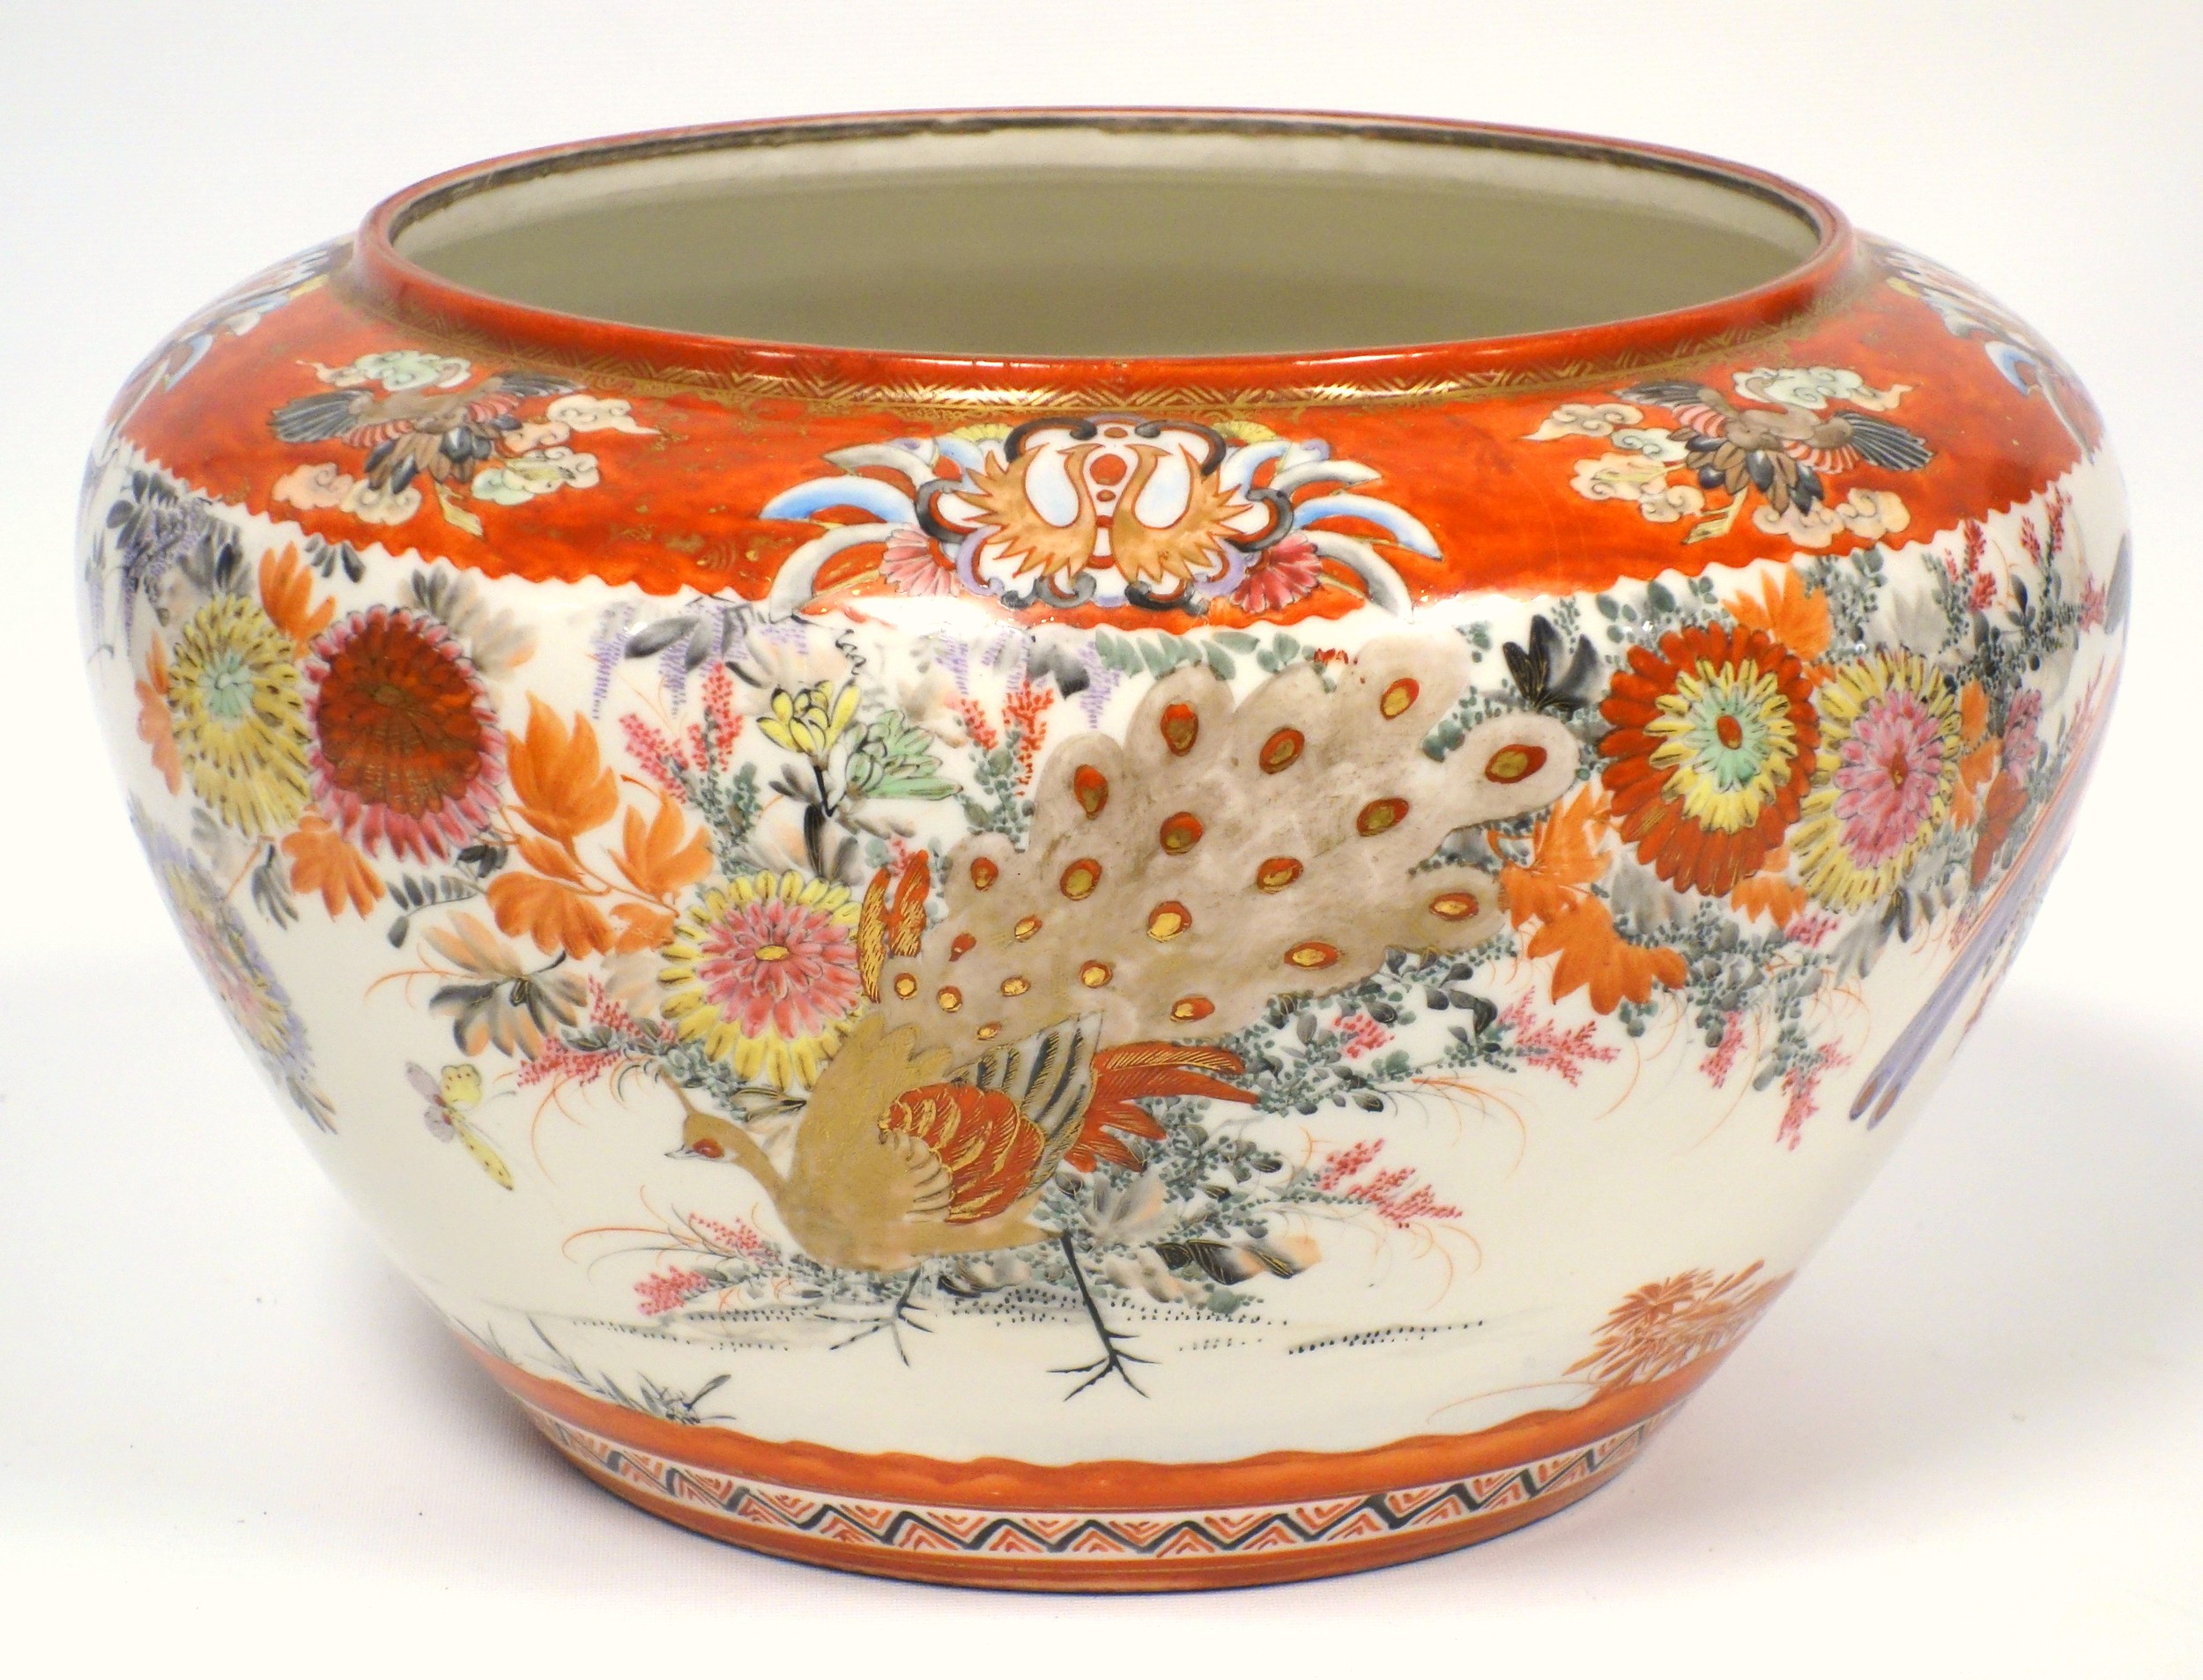 Late 19th century Japanese Kutani porcelain circular bowl painted with peacocks, other birds and - Image 3 of 7